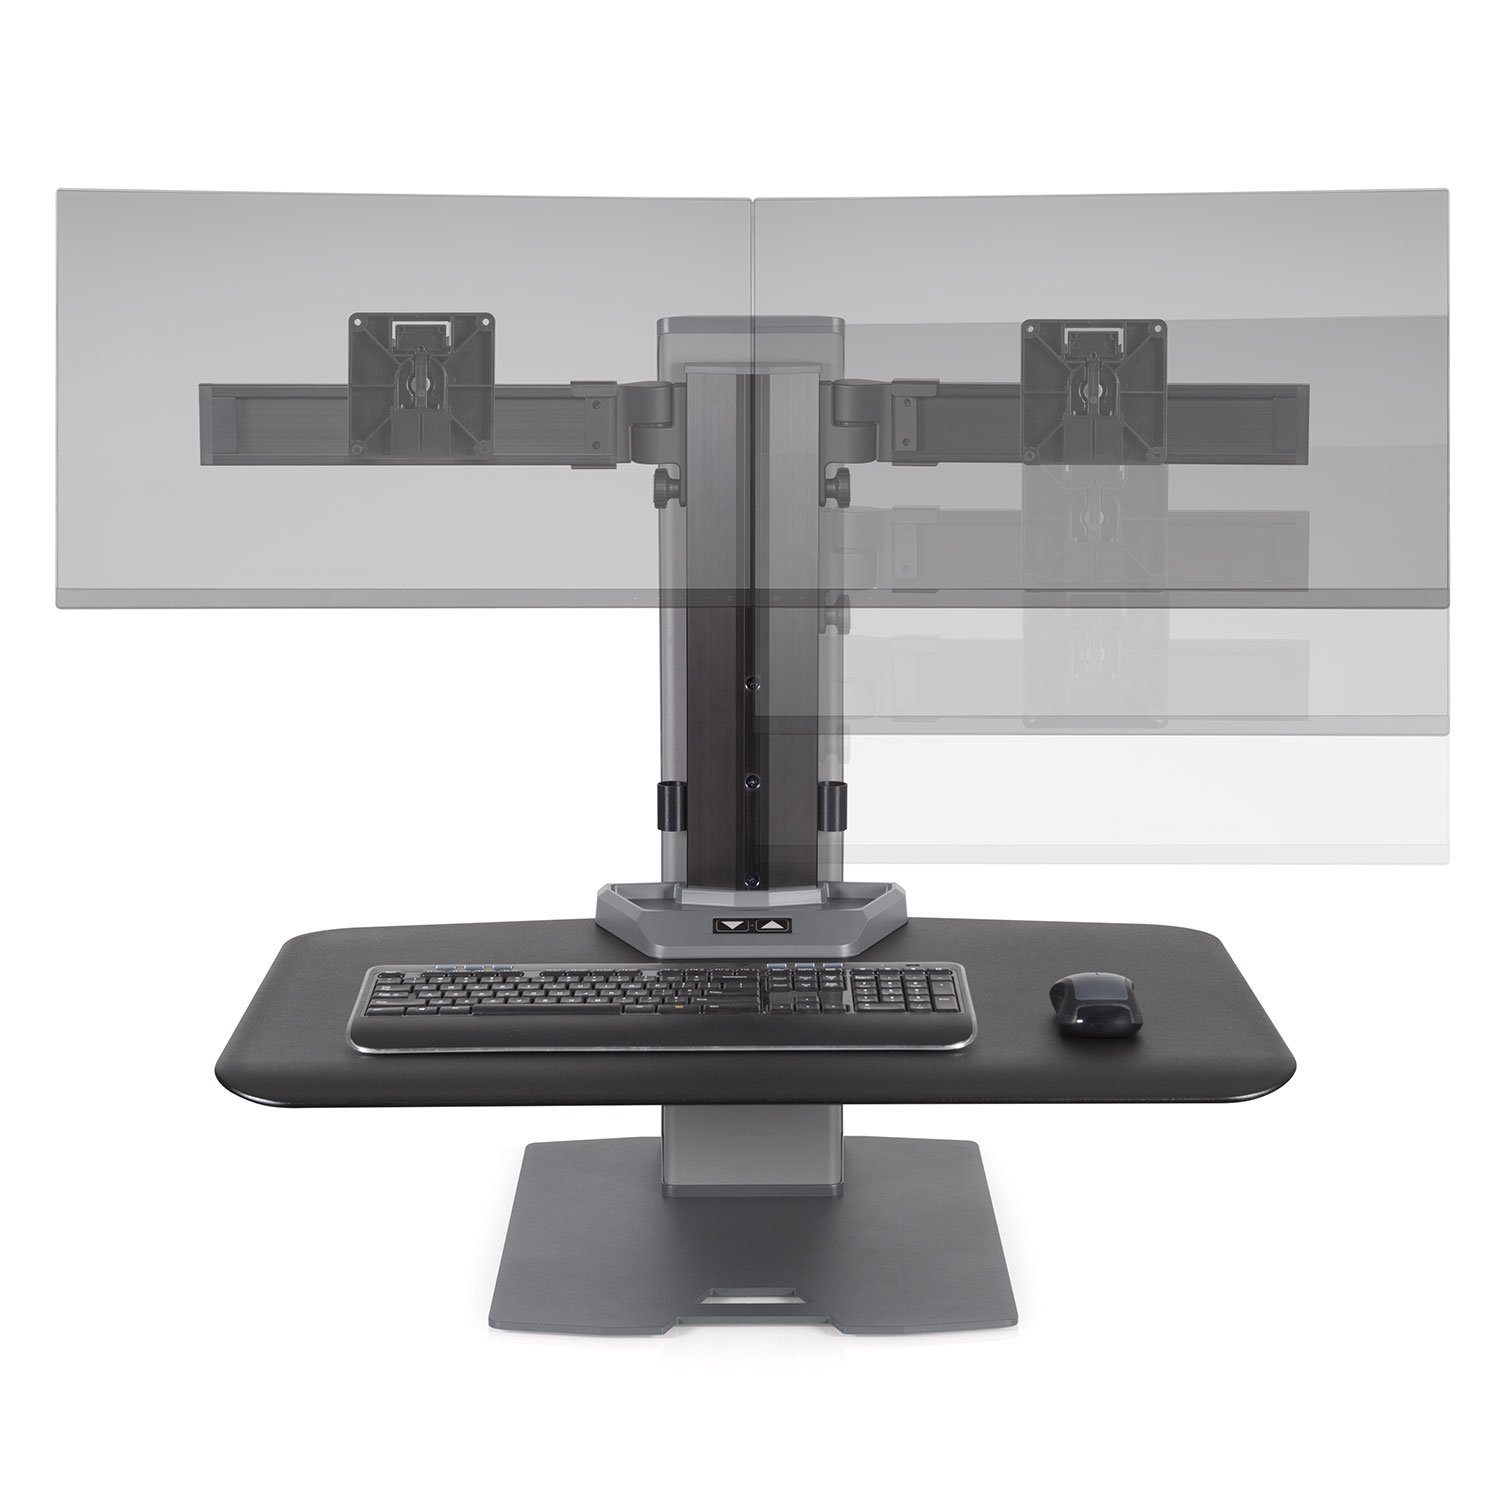 Independent movement of the monitors lets users keep each monitor at a comfortable, ergonomic level